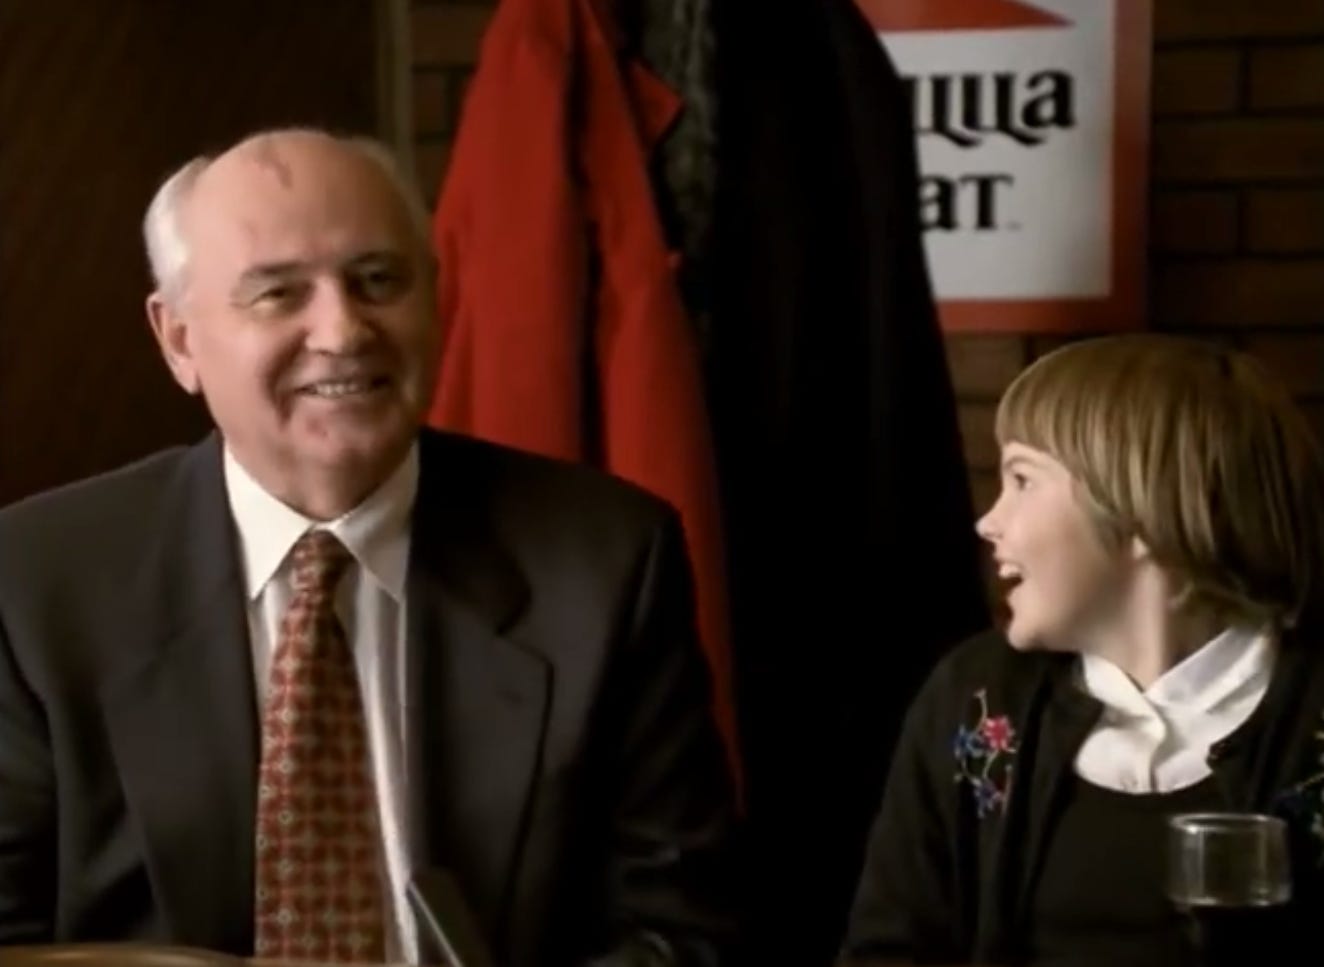 Old Pizza Hut advert resurfaces with ex-Soviet leader Mikhail Gorbachev  cutting a slice of Veggie Supreme | The Sun